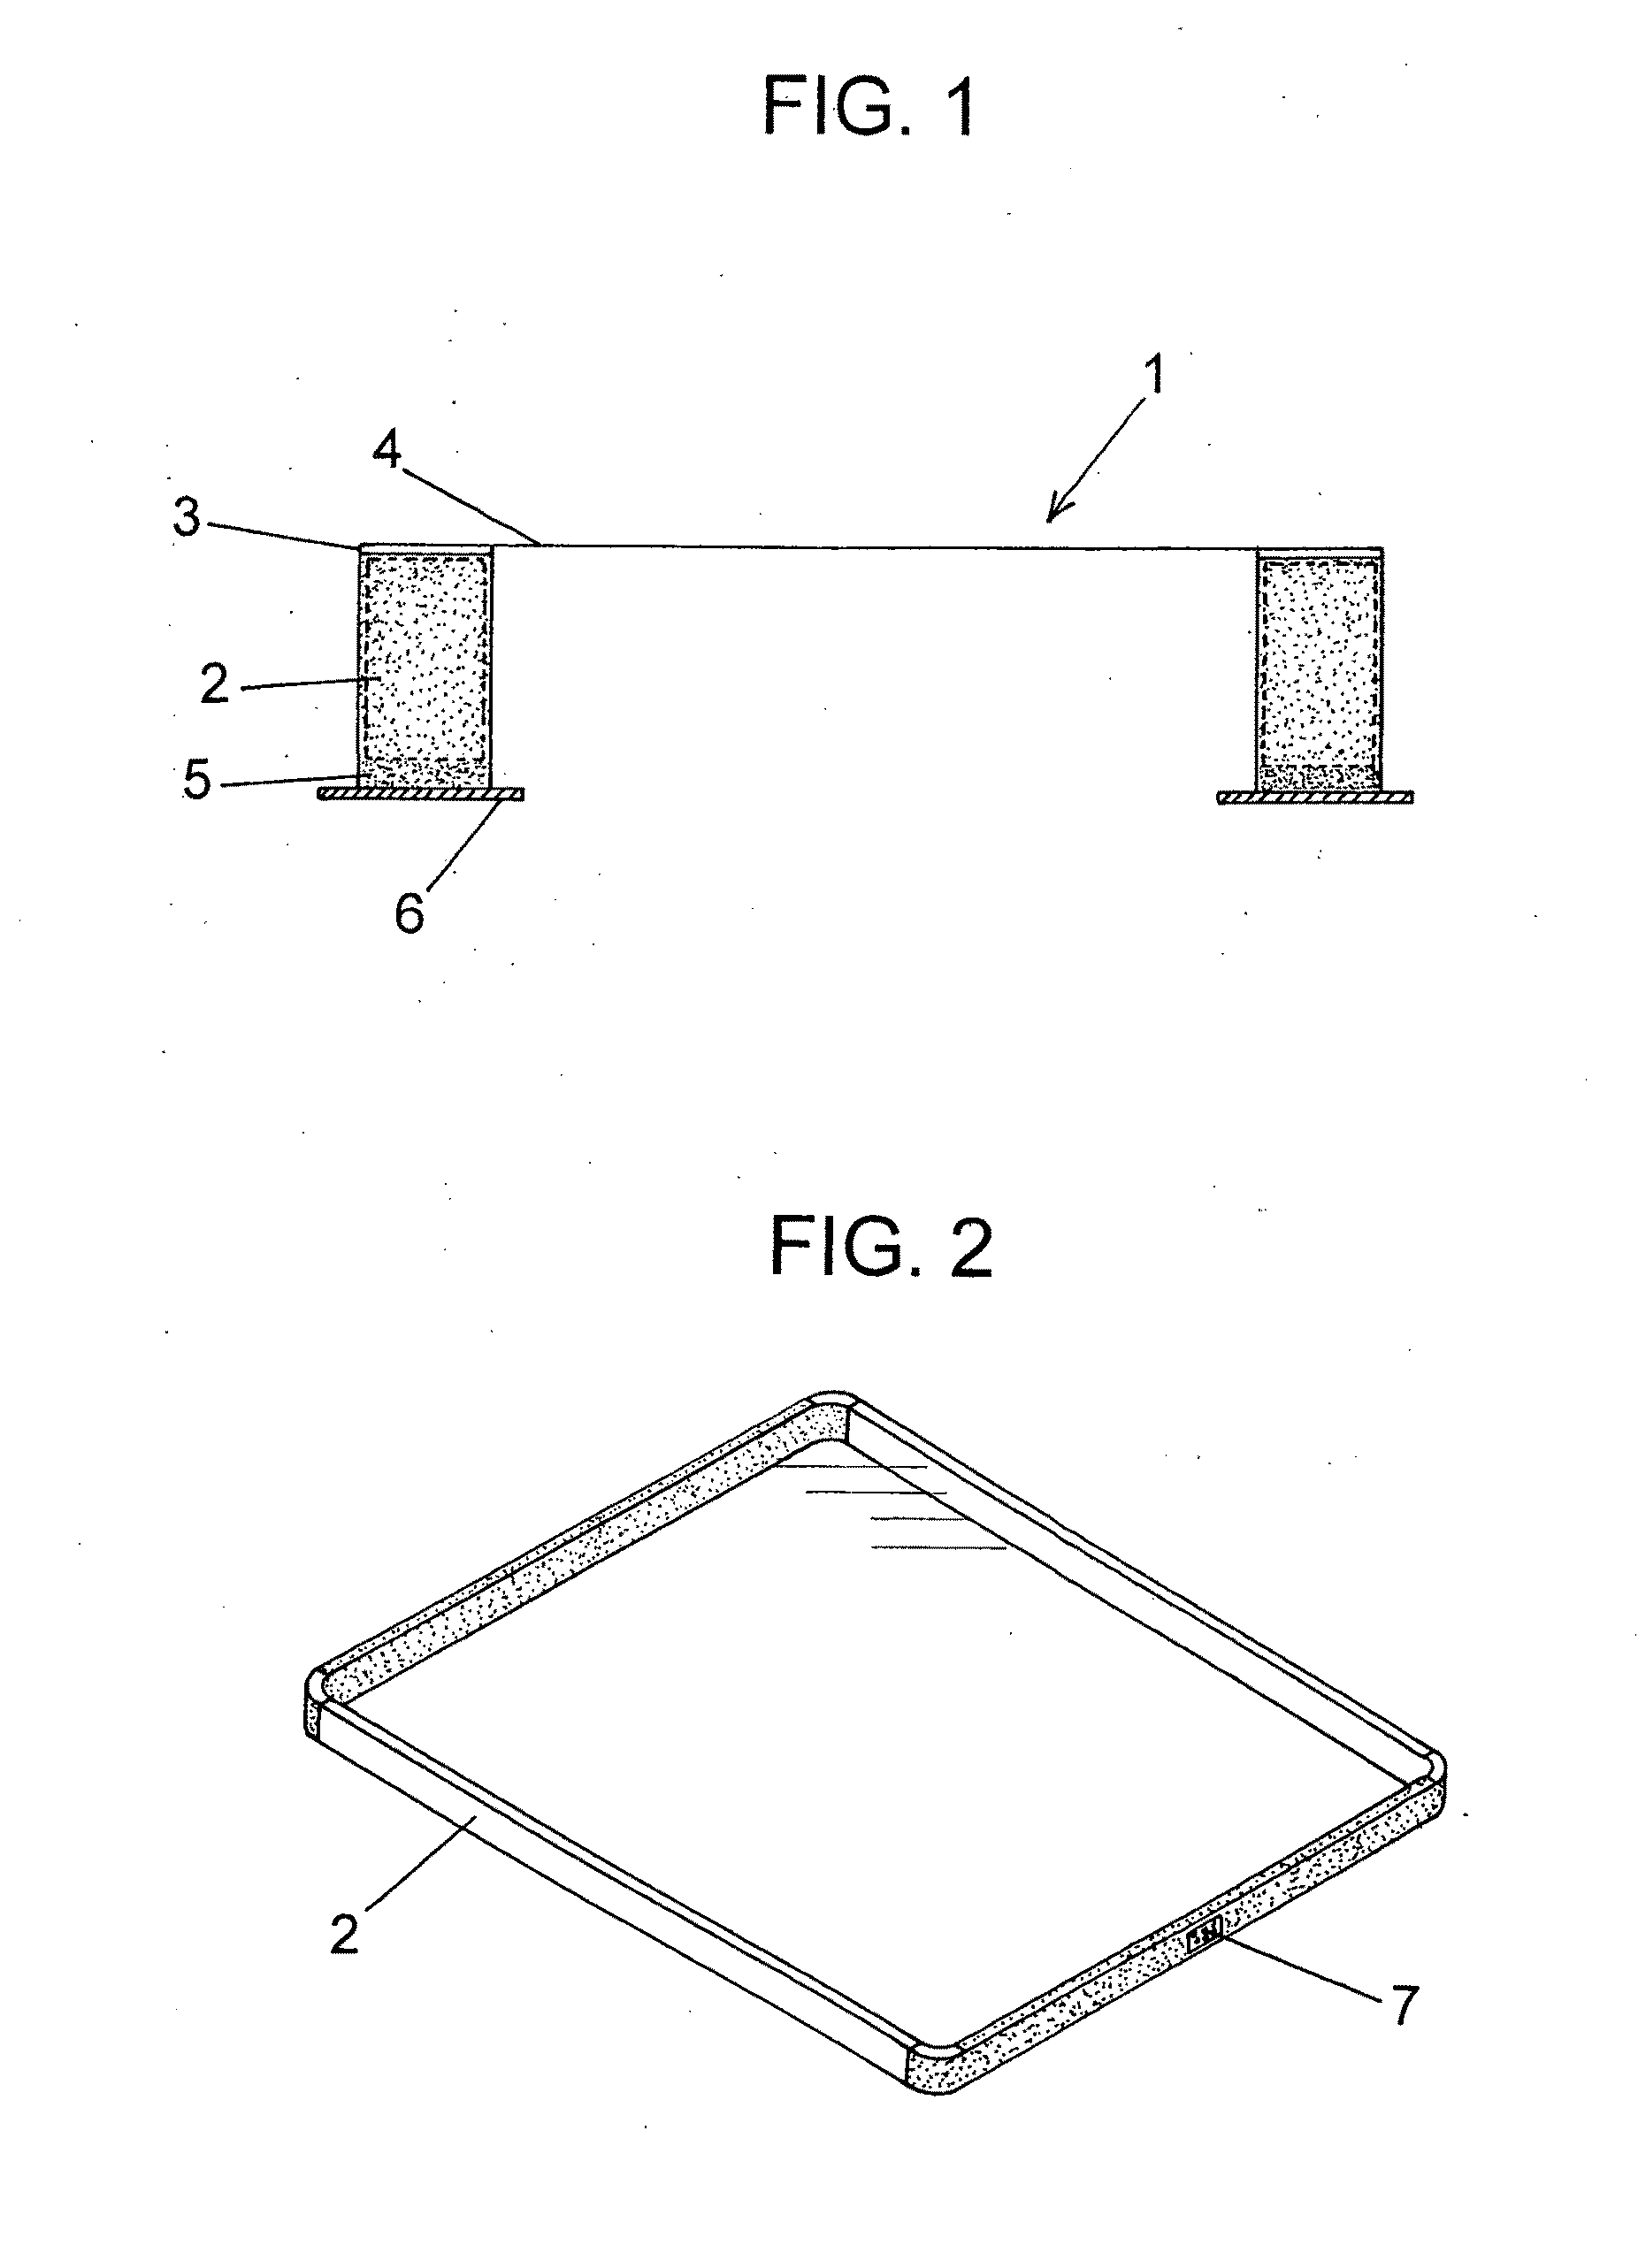 Pellicle for lithography and a method for making the same